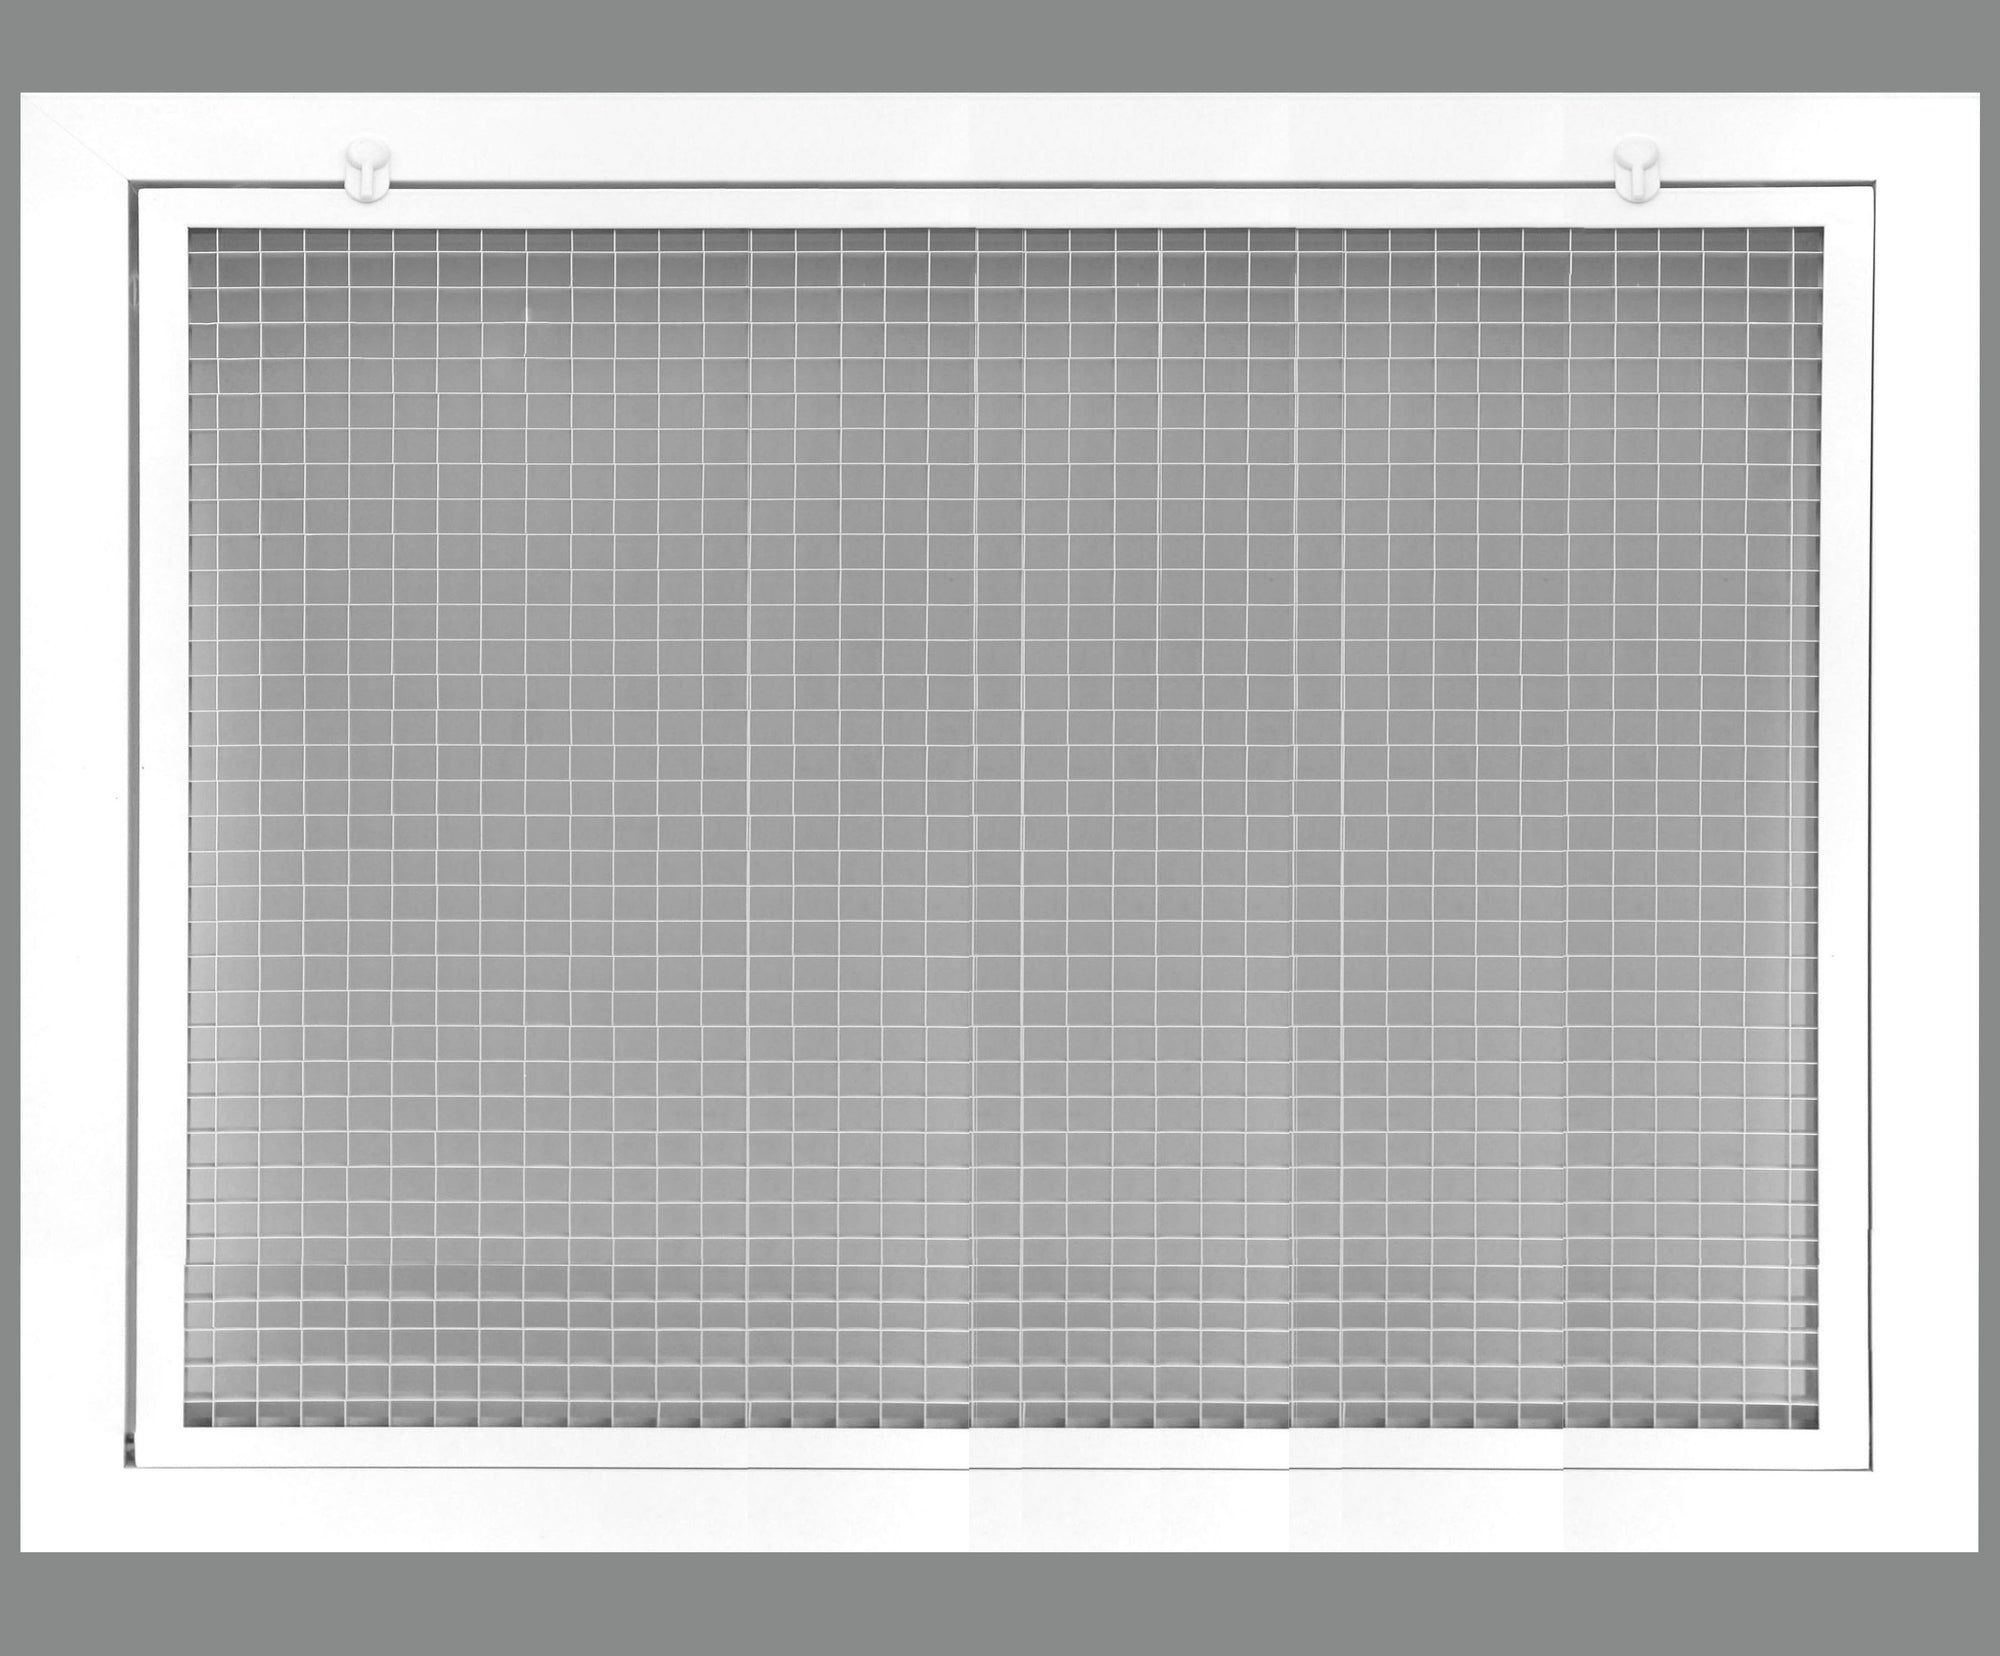 16" x 12" Cube Core Eggcrate Return Air Filter Grille for 1" Filter